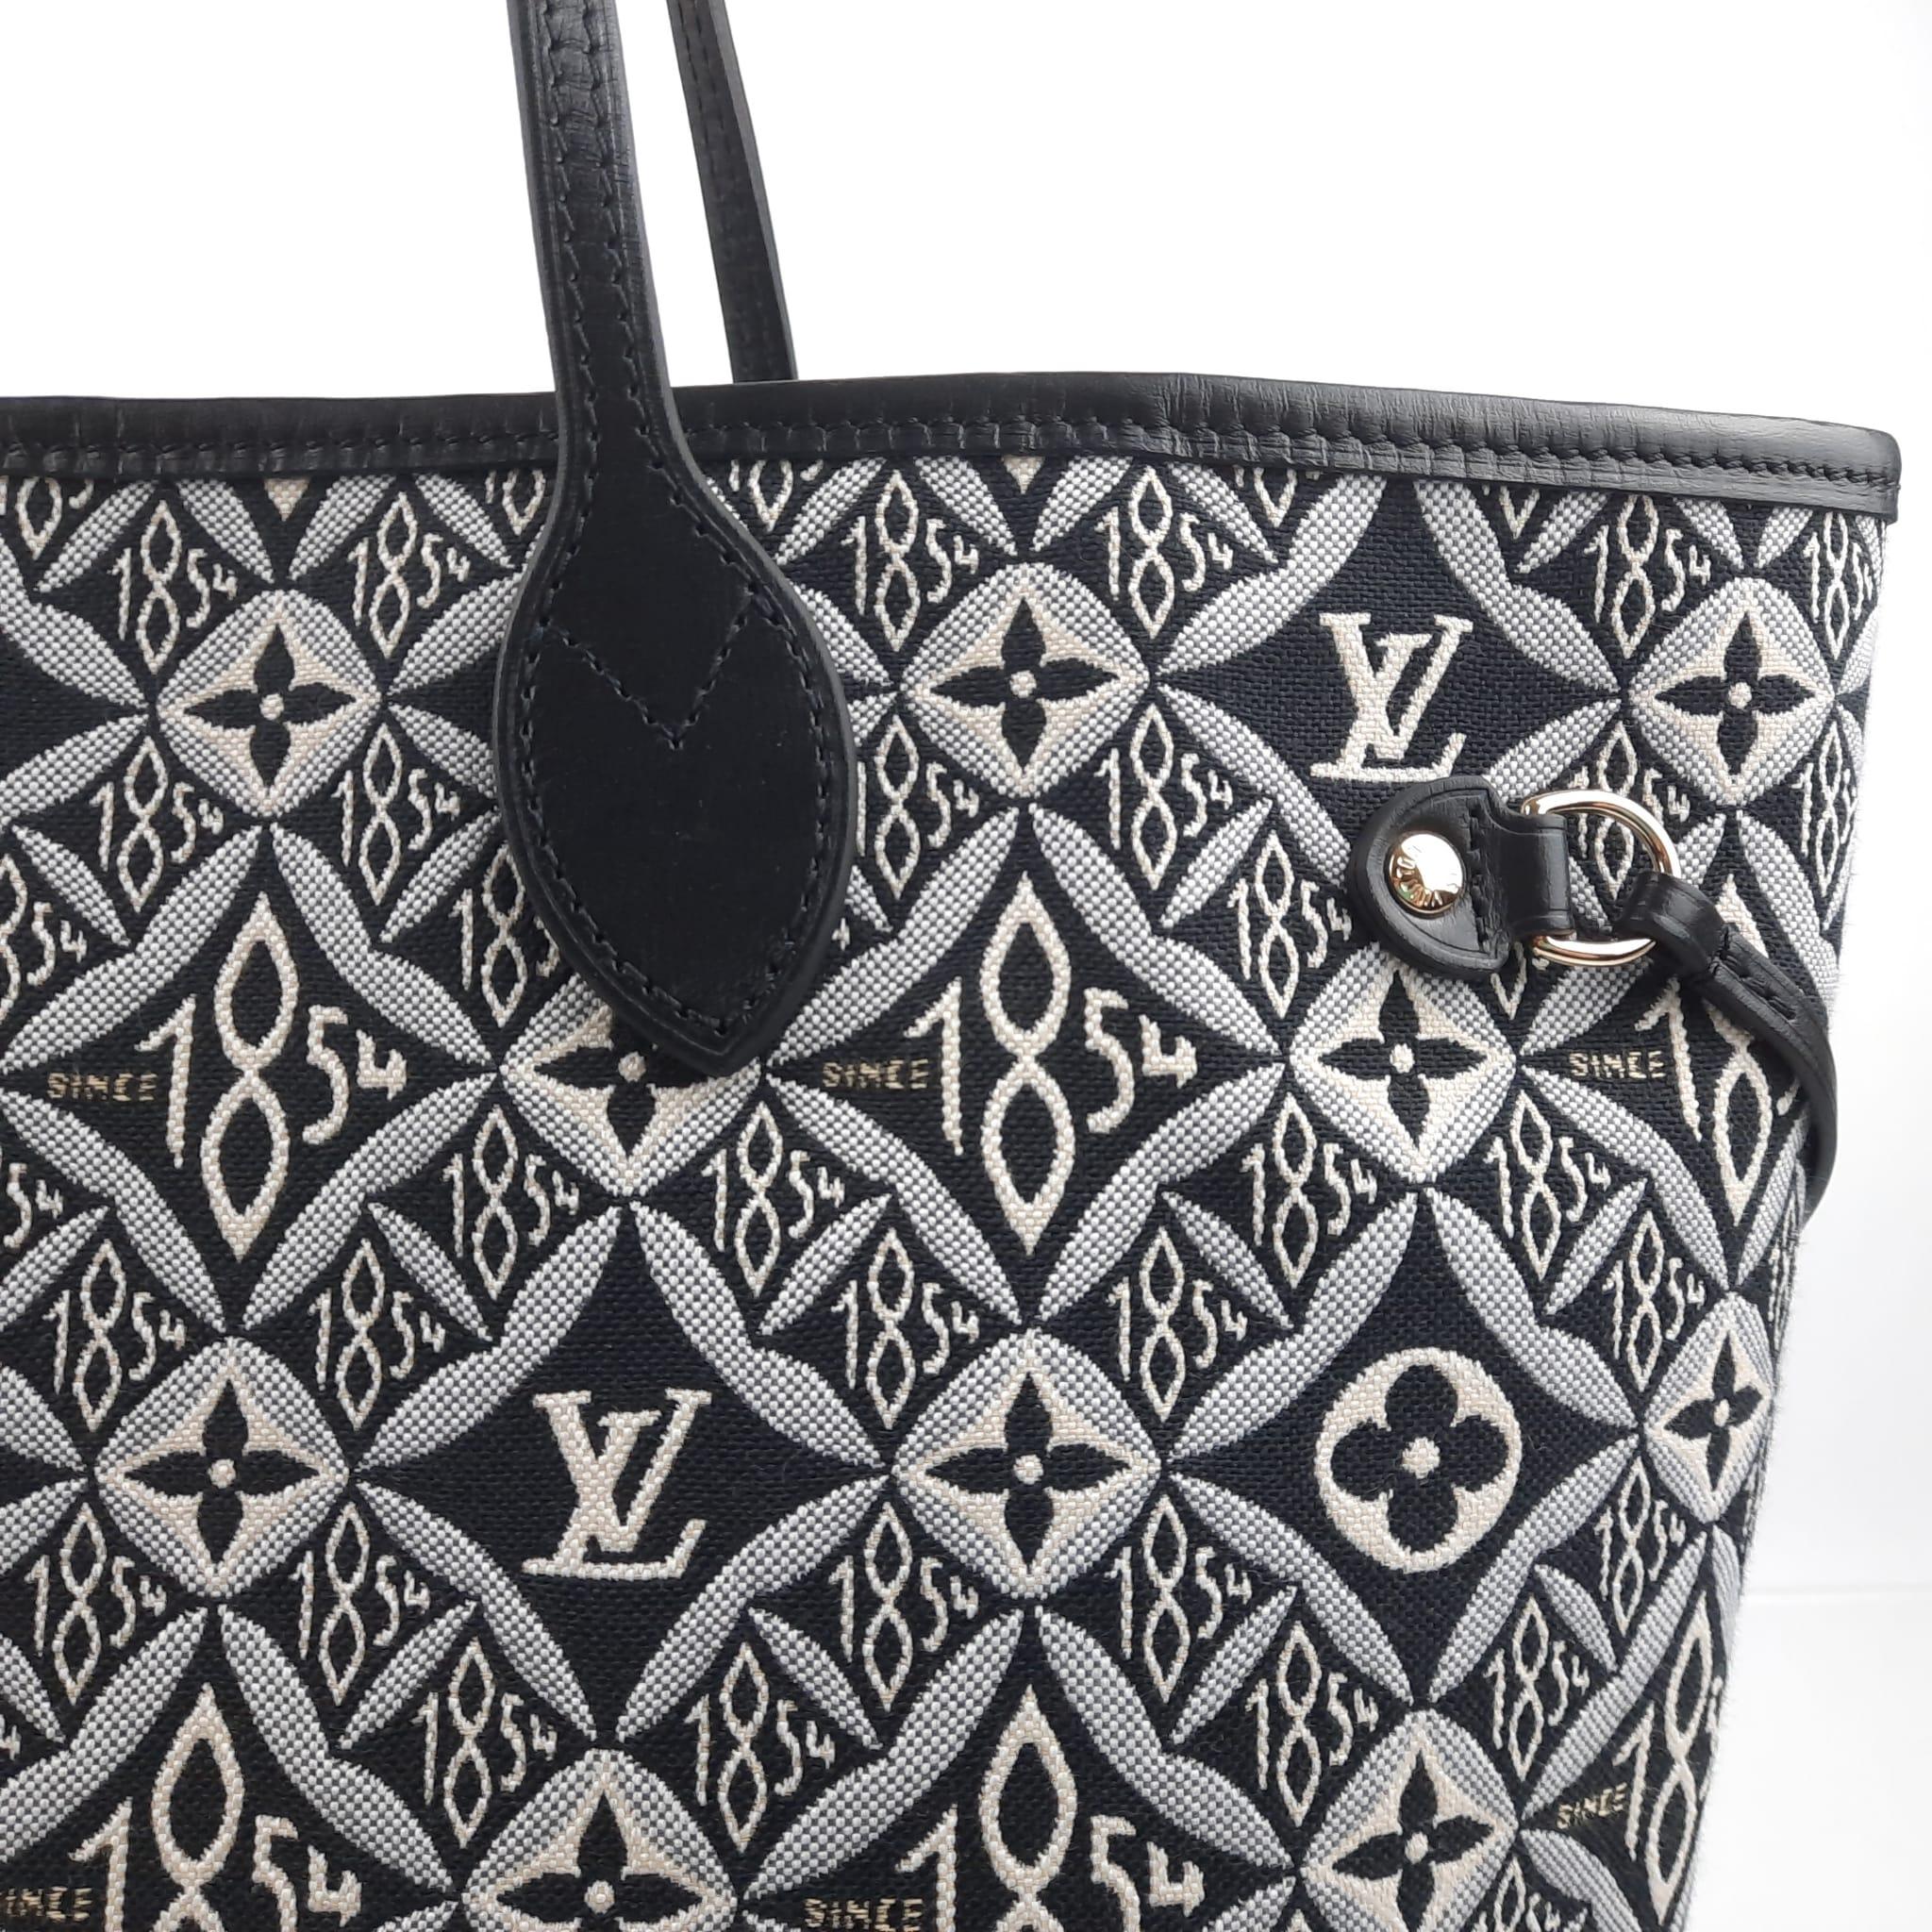 Women's or Men's Louis Vuitton Grey Since 1854 Neverfull MM Tote Bag